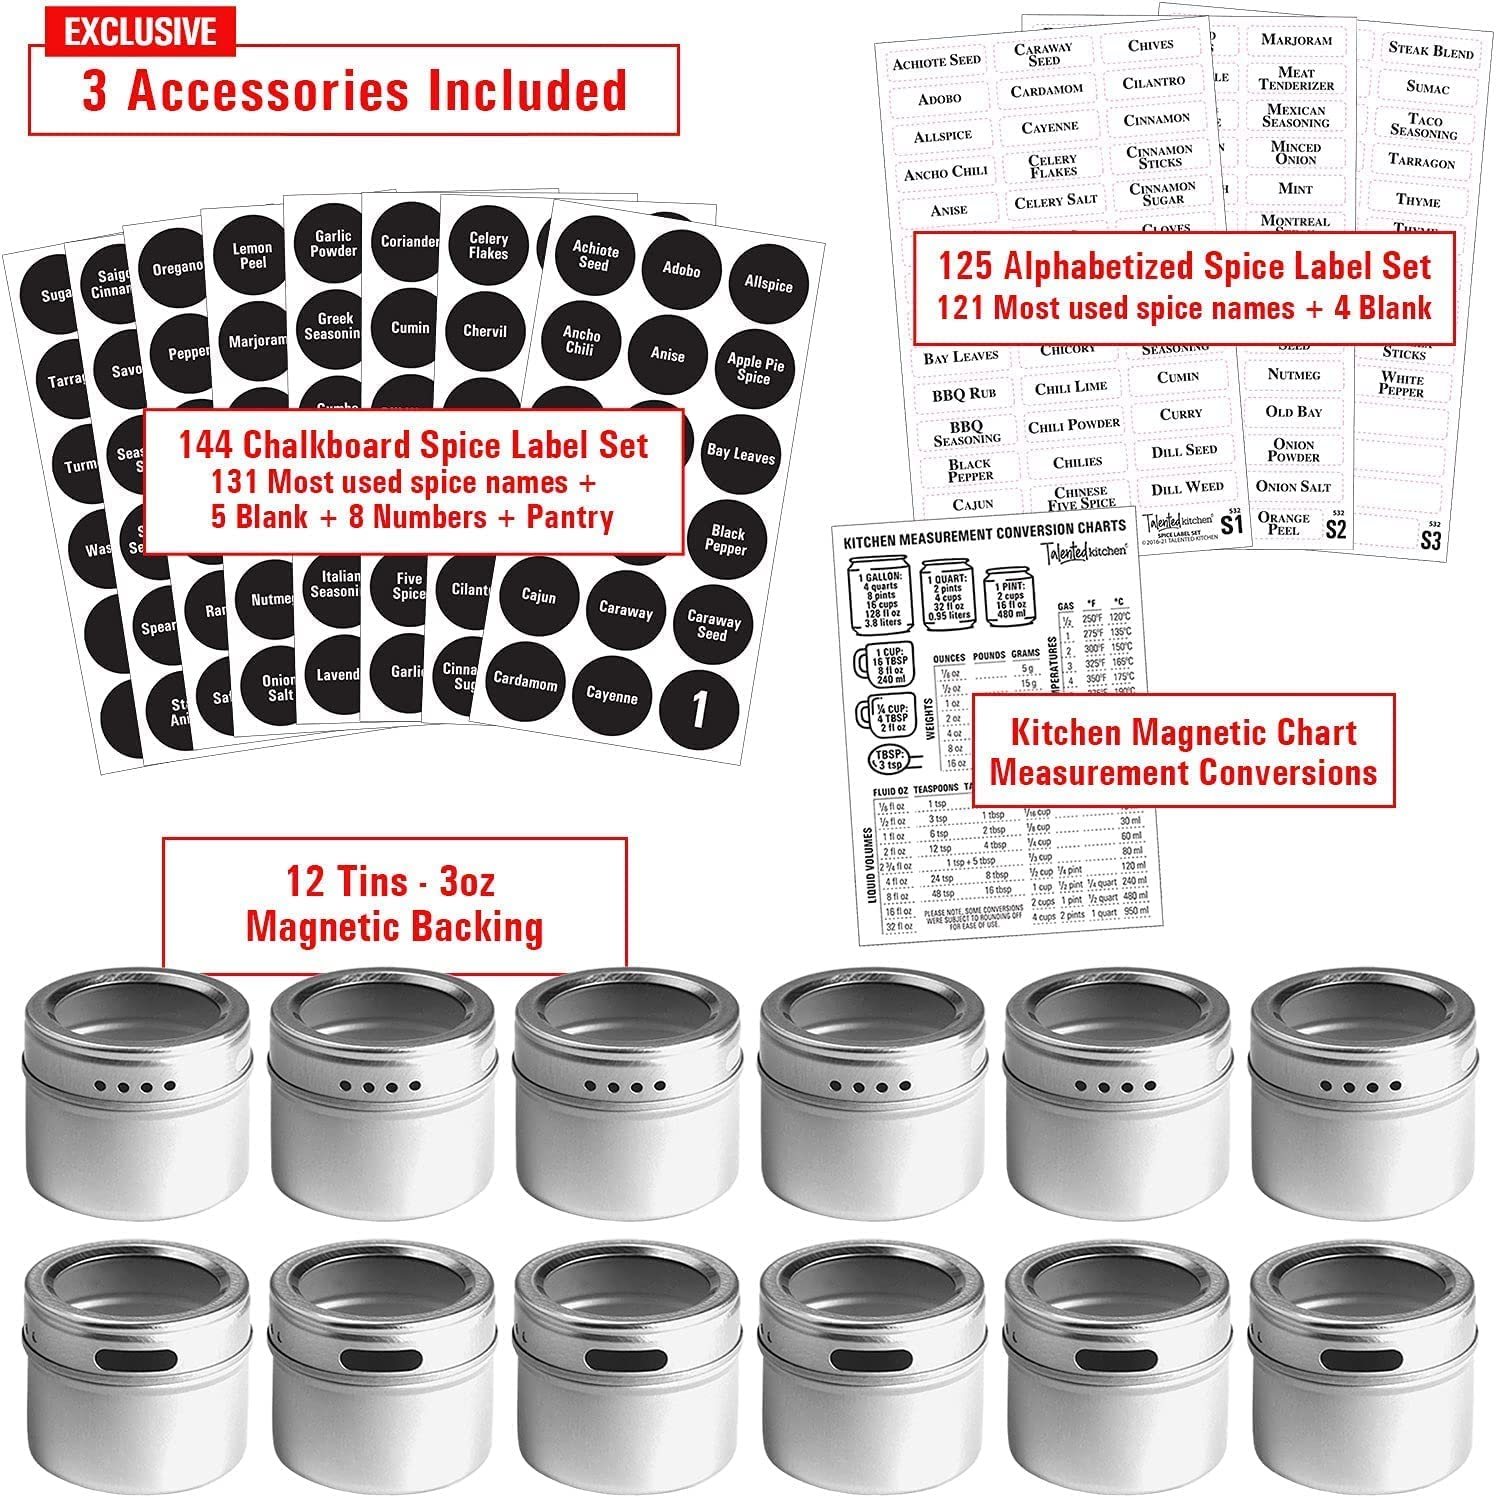 Set of 12 Magnetic Spice Tins with 12 Window-Top Sift and Pour Lids, 269 Preprinted Seasoning Label Stickers in 2 Styles for 3 Oz Herb Jars